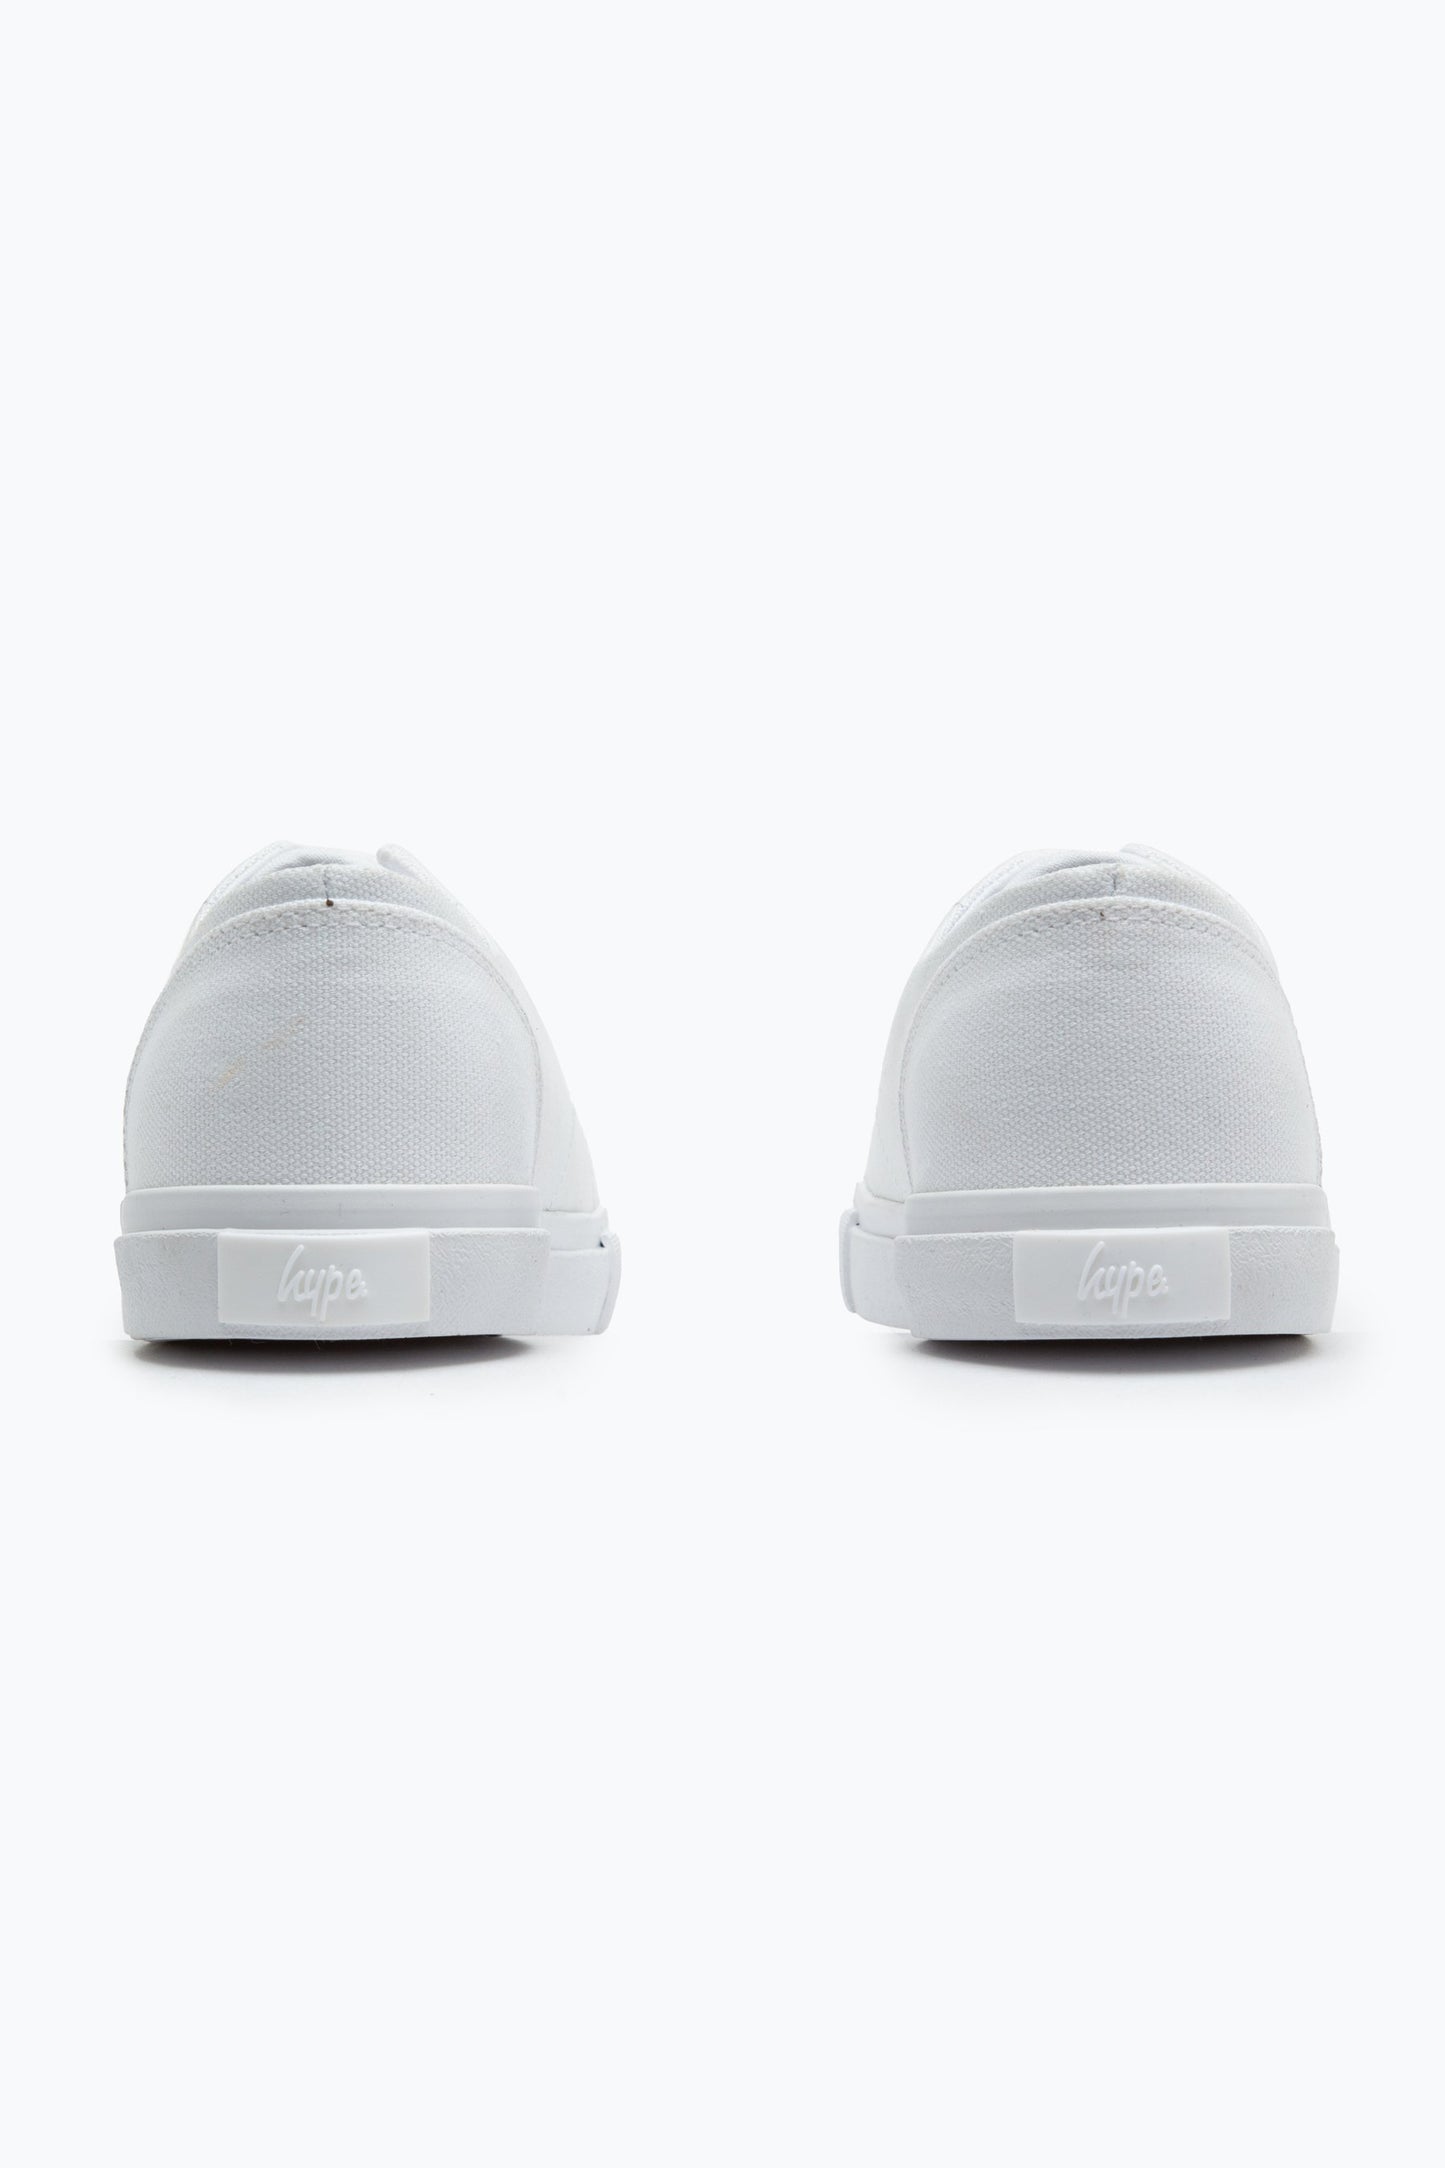 HYPE WHITE PUMP KIDS TRAINERS